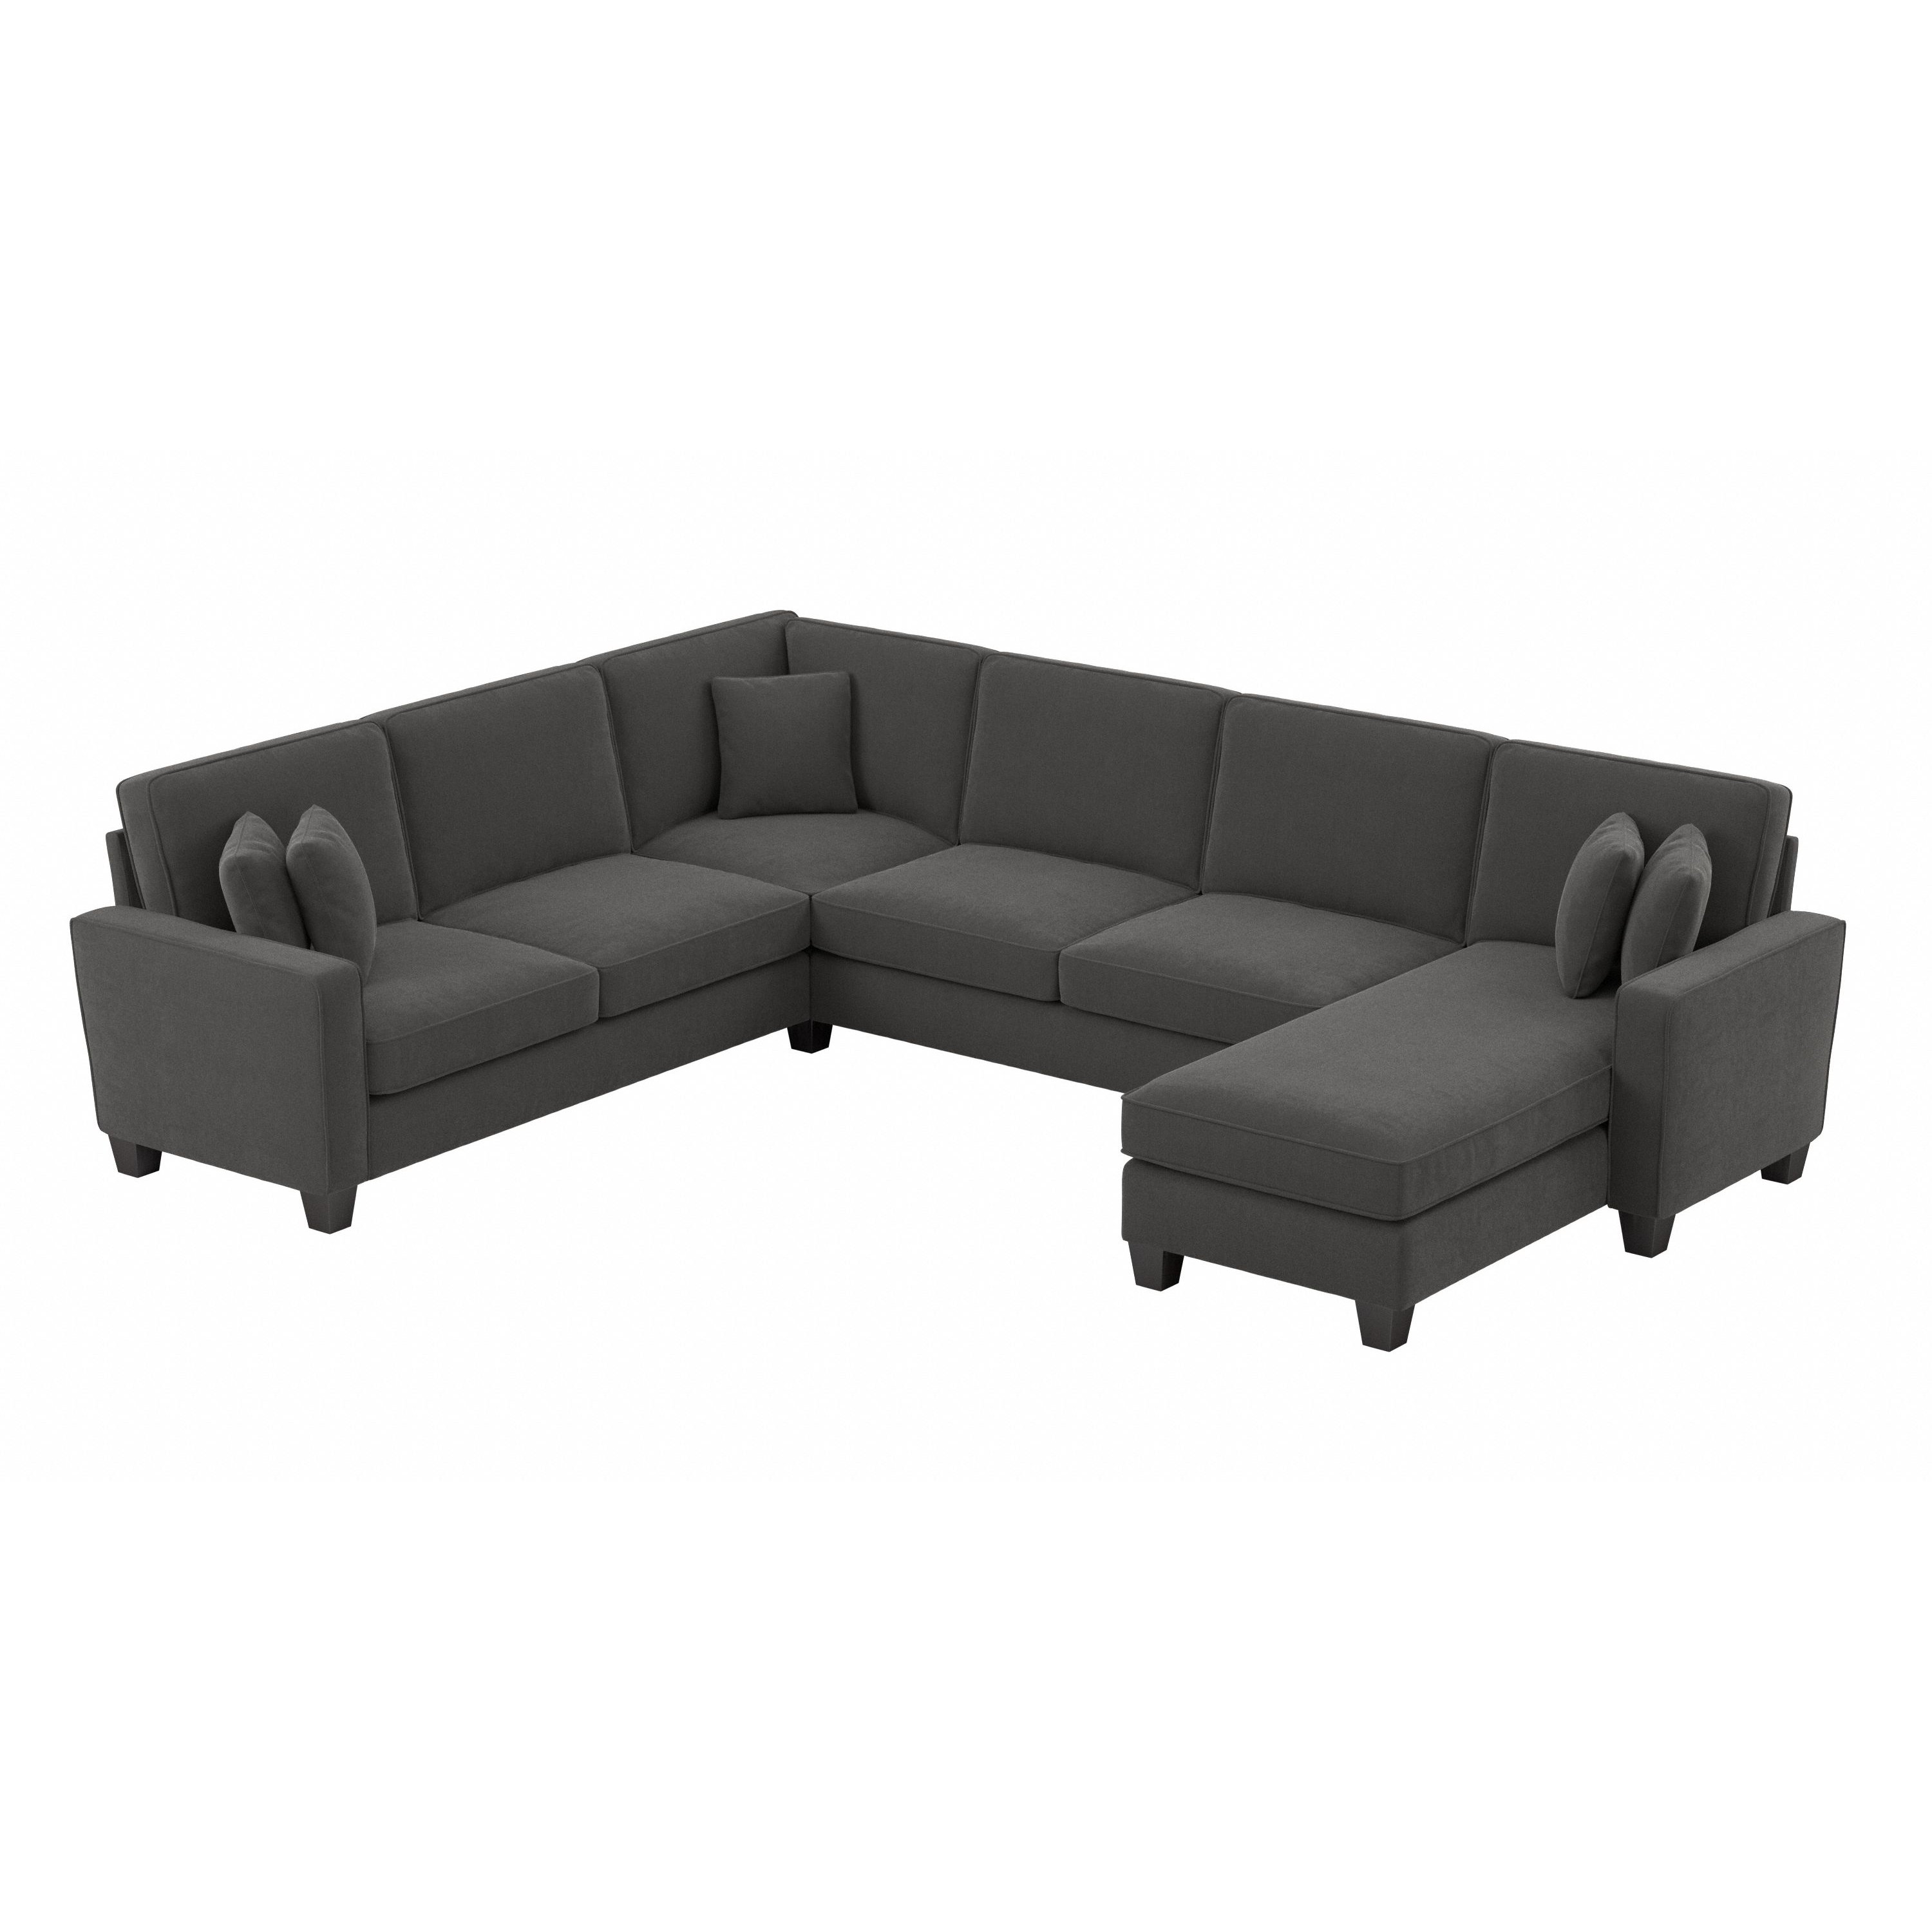 Shop Bush Furniture Stockton 128W U Shaped Sectional Couch with Reversible Chaise Lounge 02 SNY127SCGH-03K #color_charcoal gray herringbone fabr